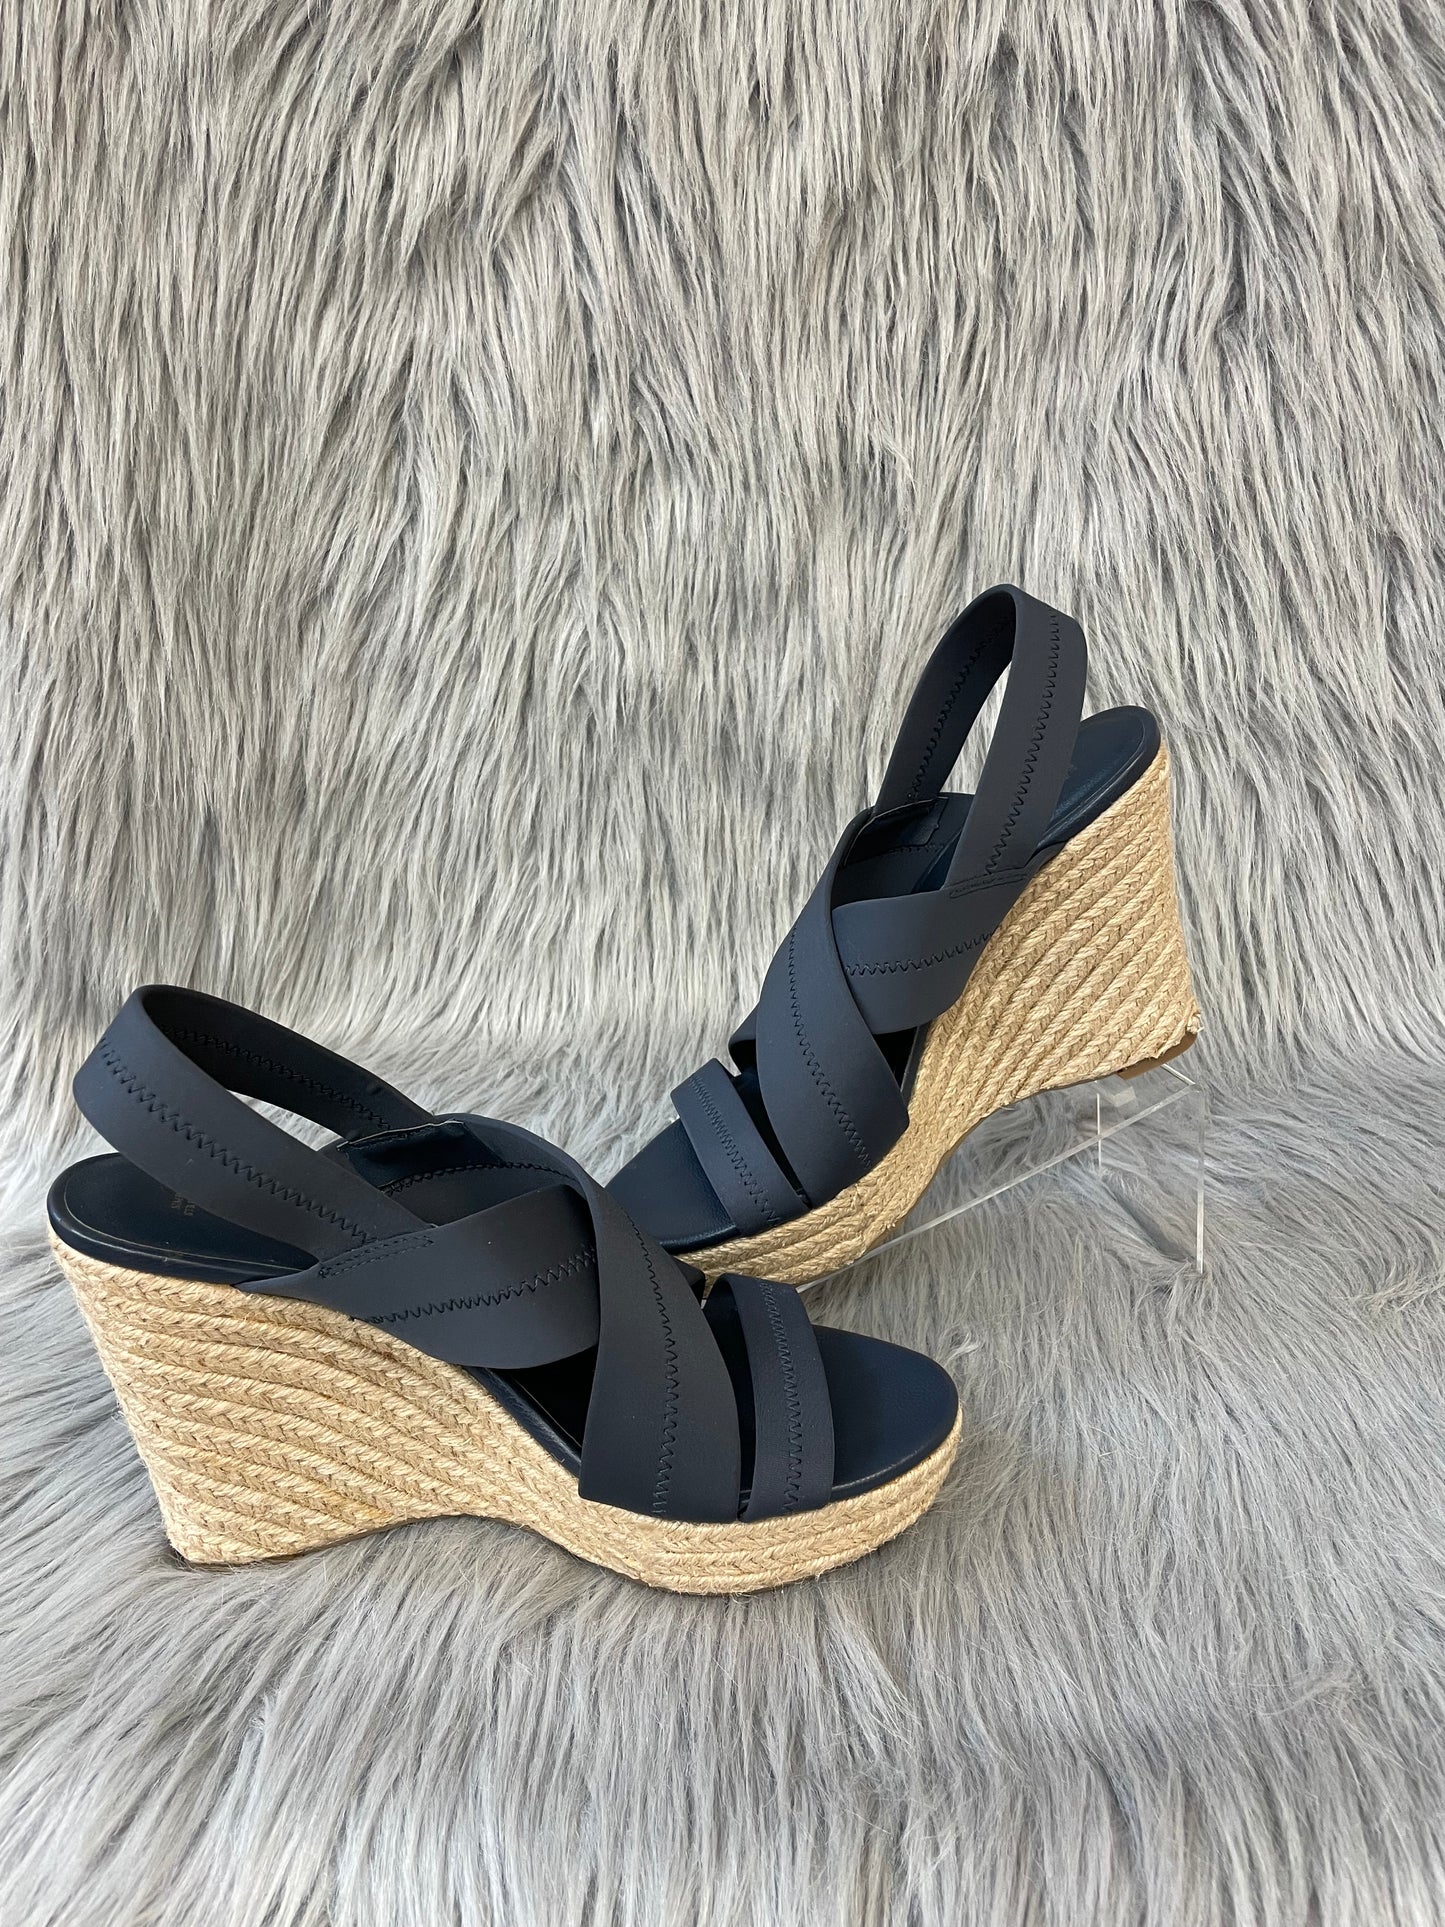 Sandals Heels Wedge By Simply Vera  Size: 8